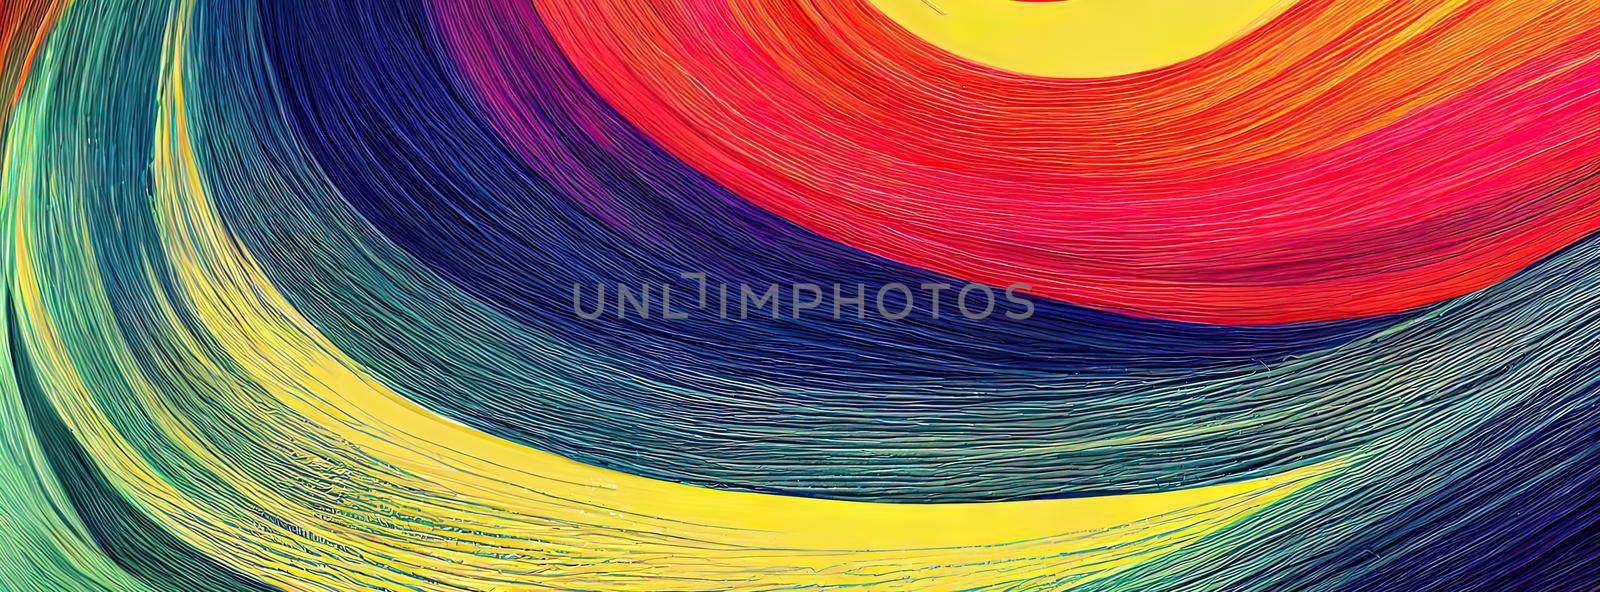 Smooth colorful template banner with gradient color. Design with liquid shape abstract background modern by FokasuArt